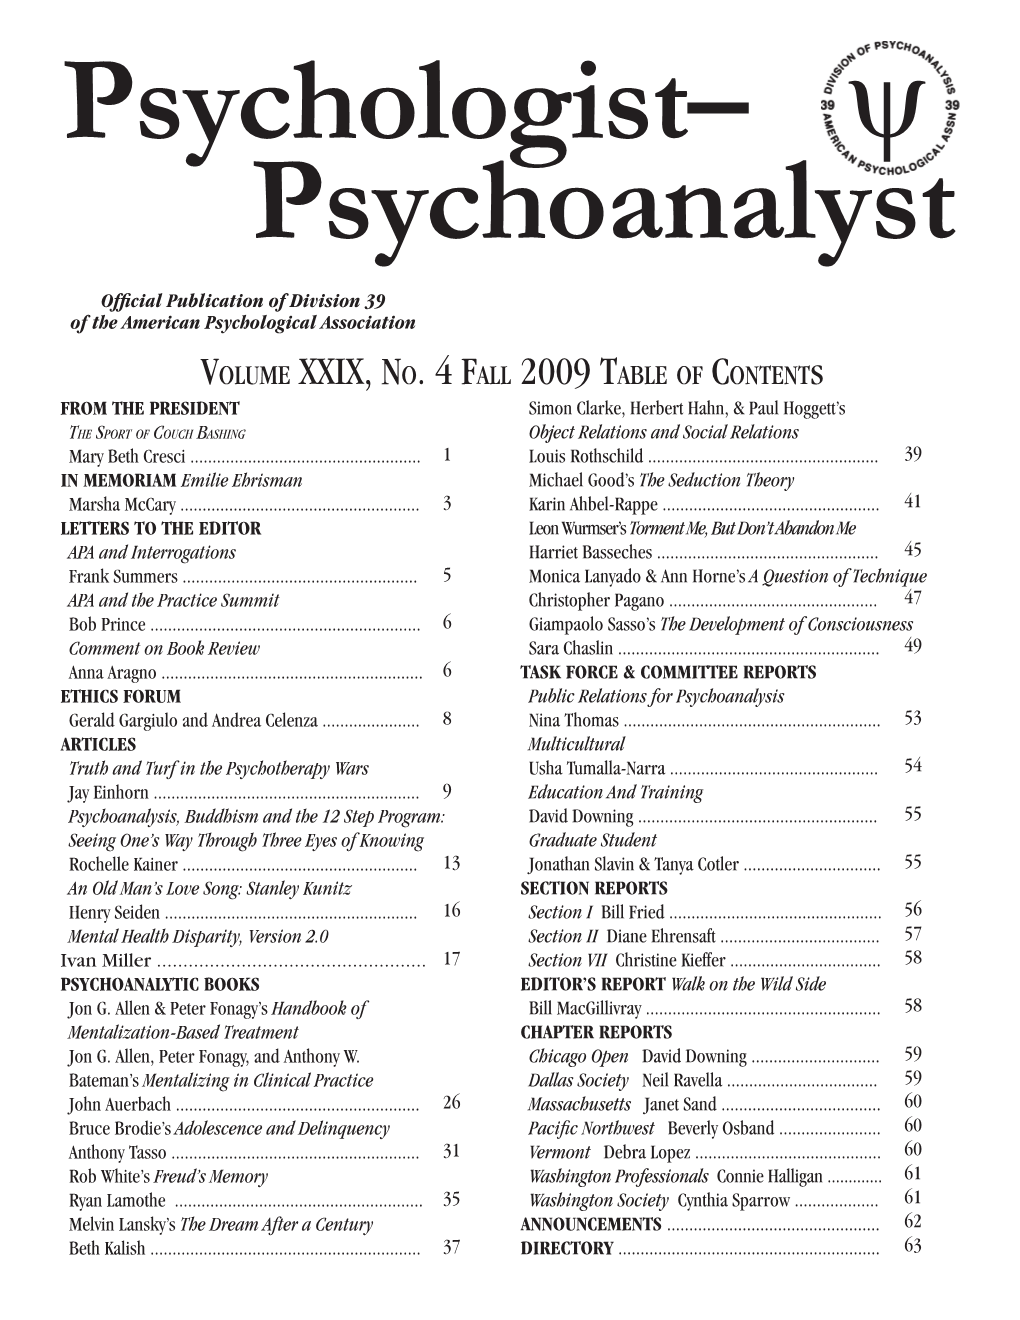 Volume XXIX, No. 4 Fall 2009 Table of Contents